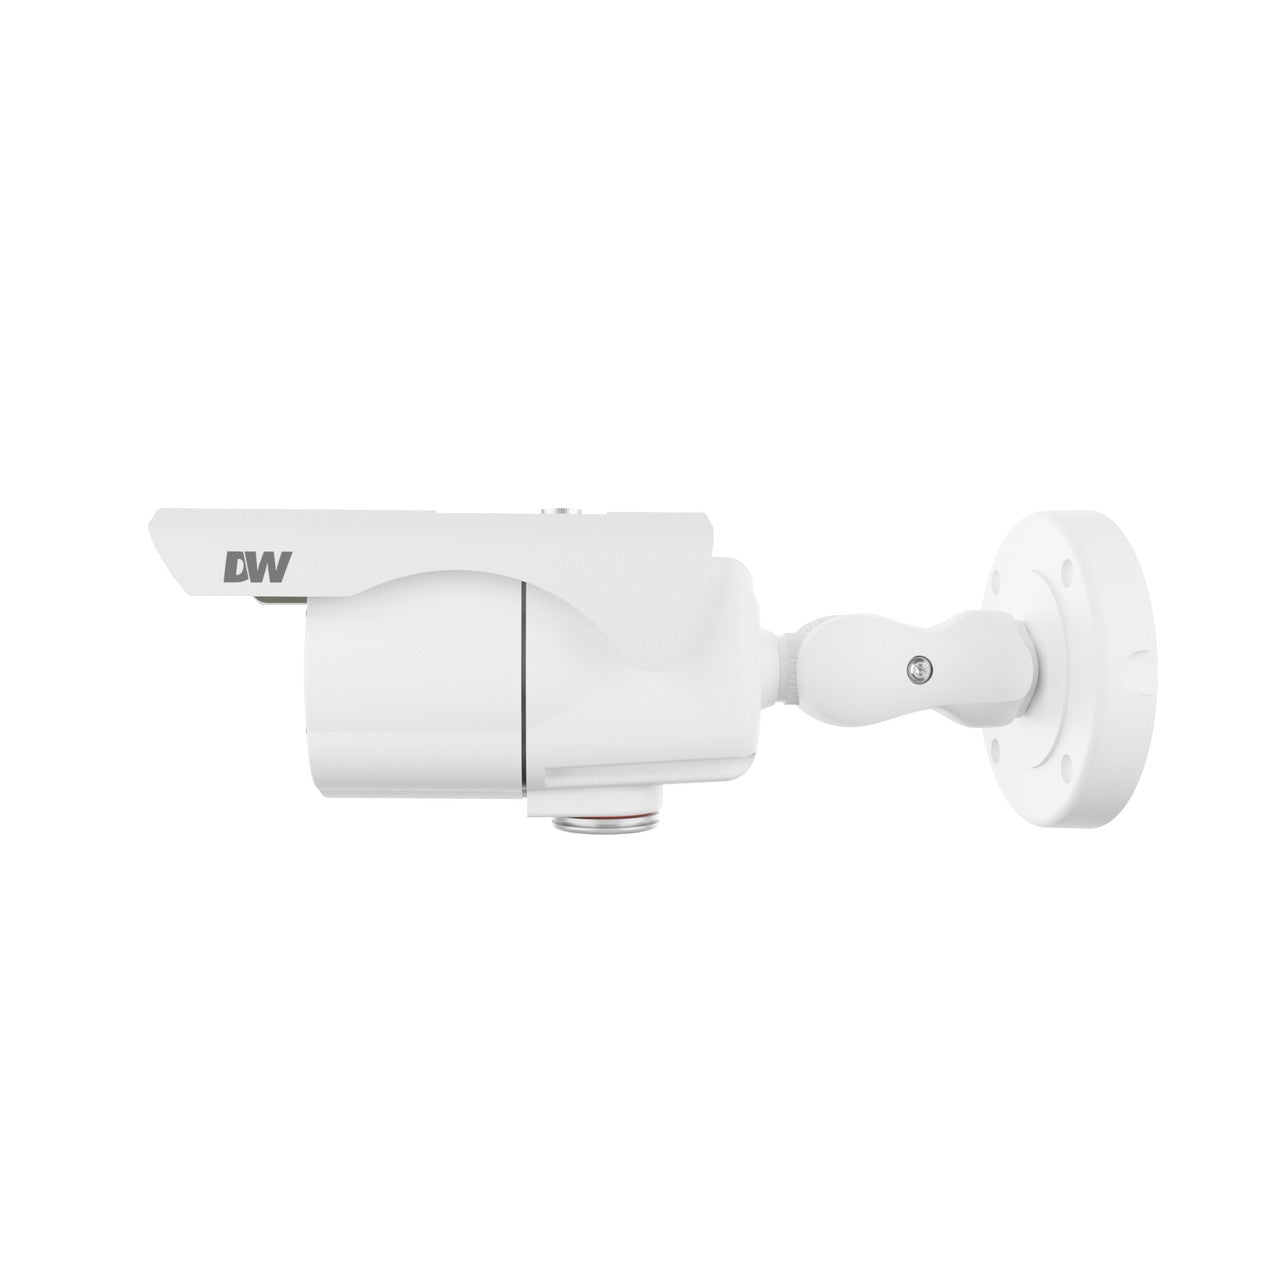 Digital Watchdog DWC-MB45Wi650TW 5MP Outdoor Bullet IP Security Camera with 6~50mm Lens and Intelligent Video Analytics